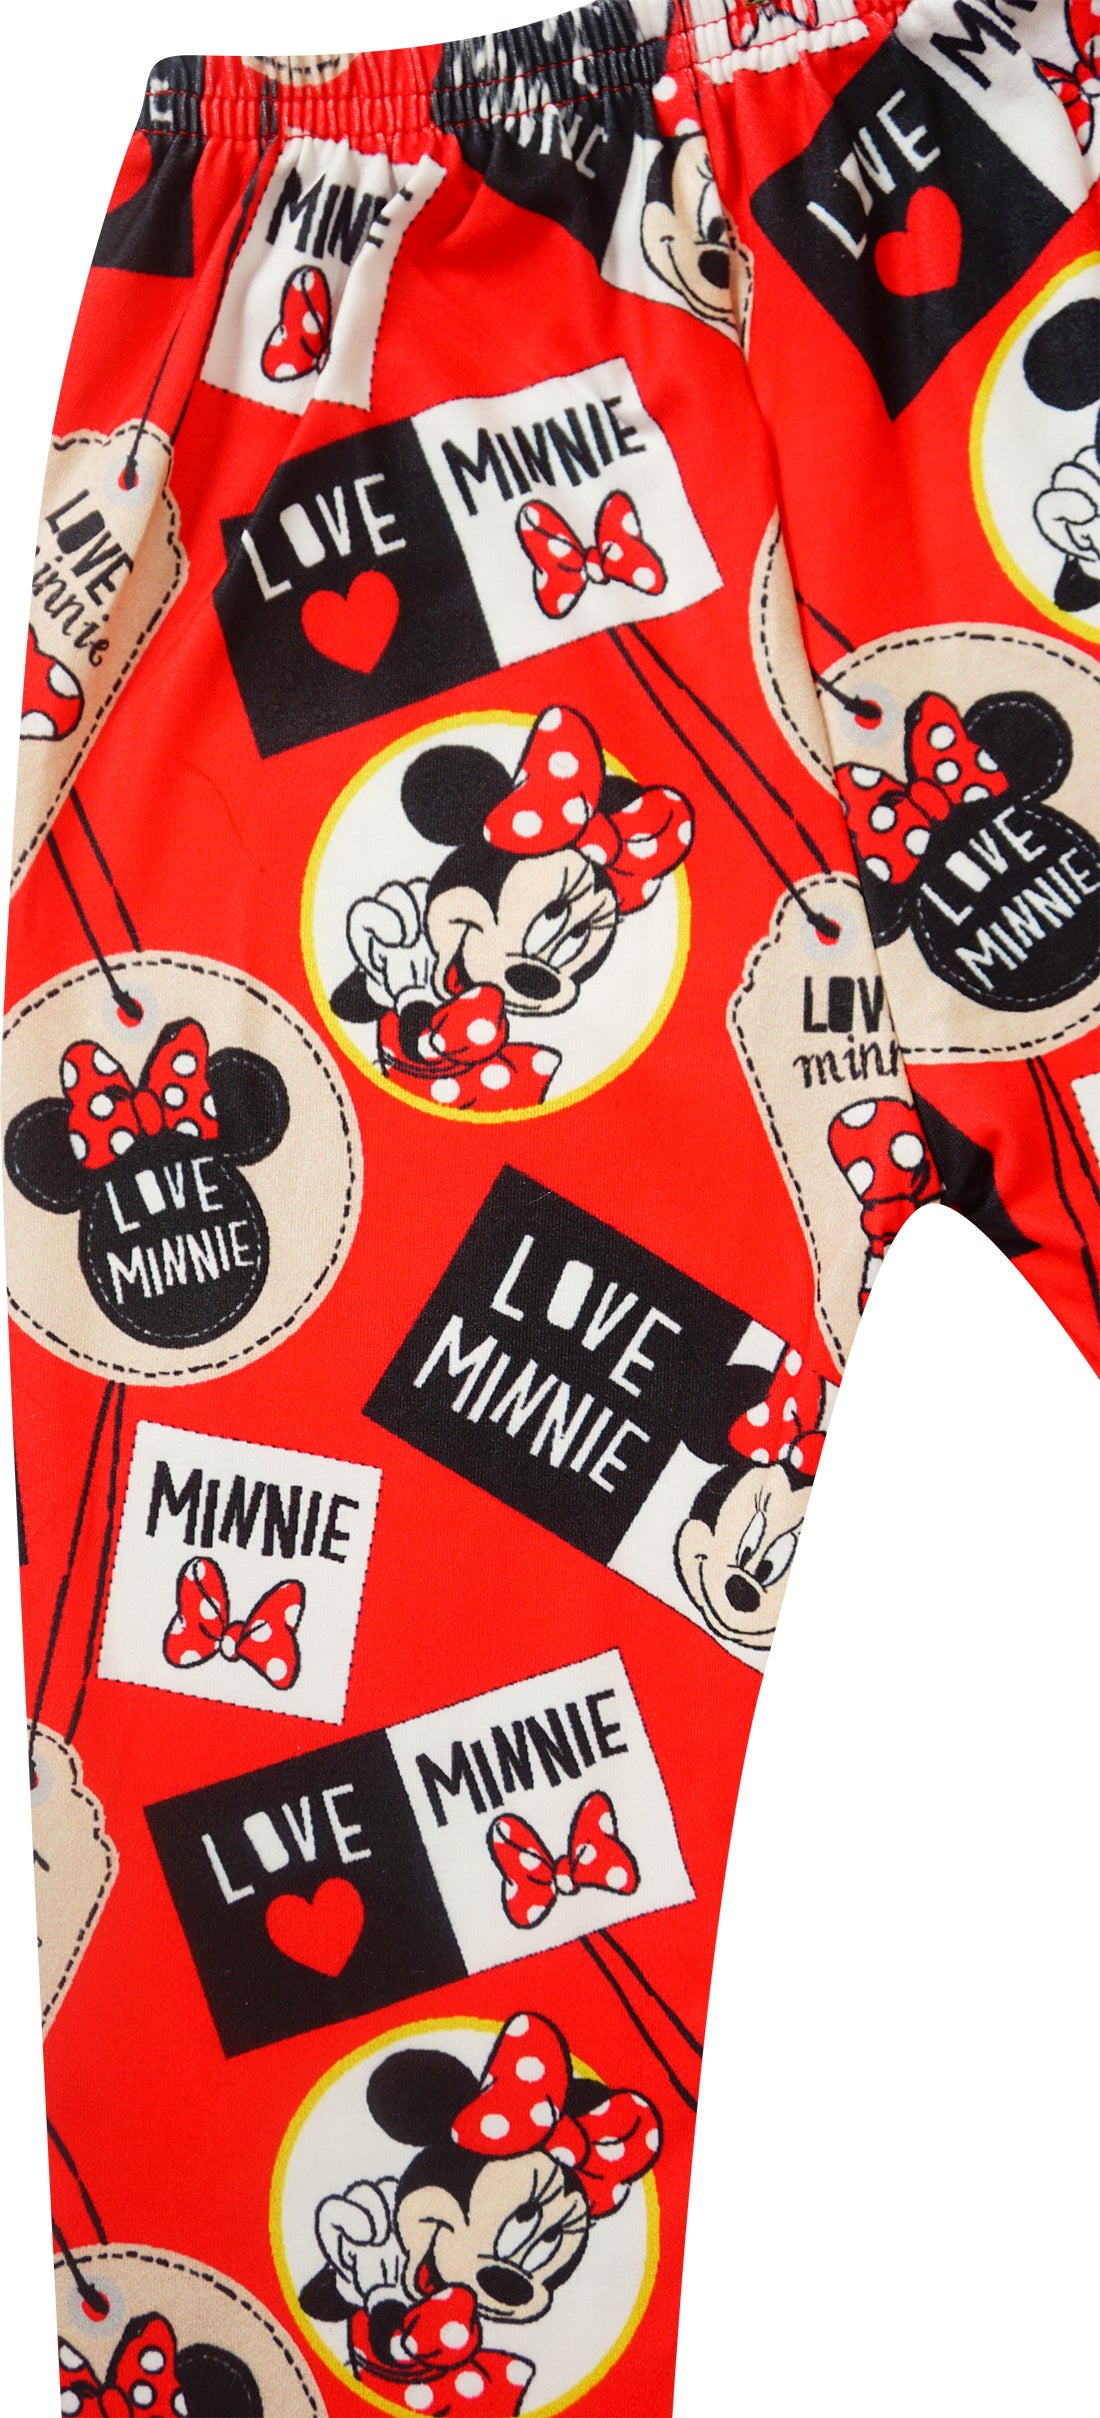 Baby Toddler Little Girls Love Minnie Scarf Outfit - Red Black - Angeline Kids